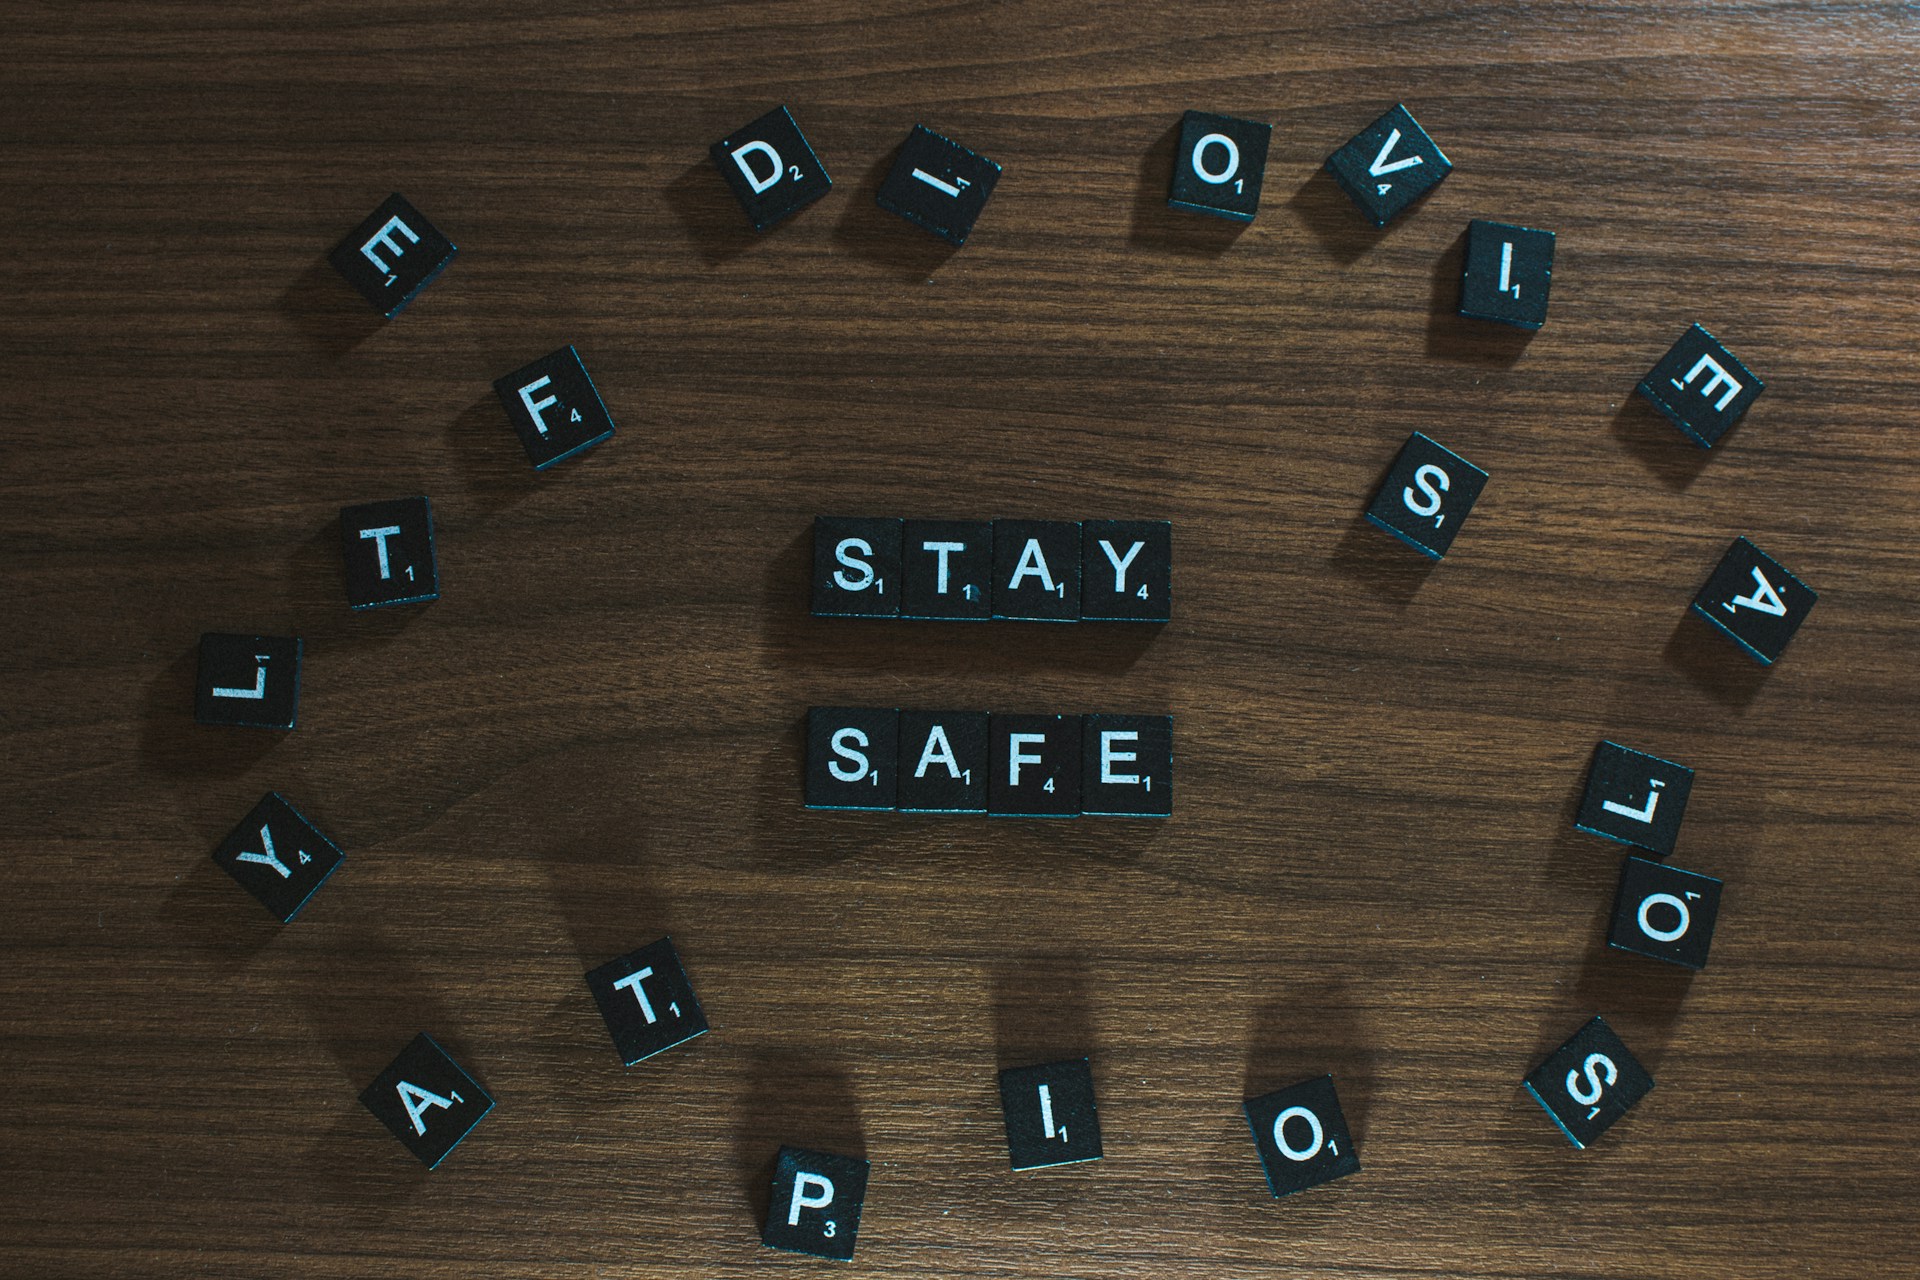 tiles that say "stay safe"